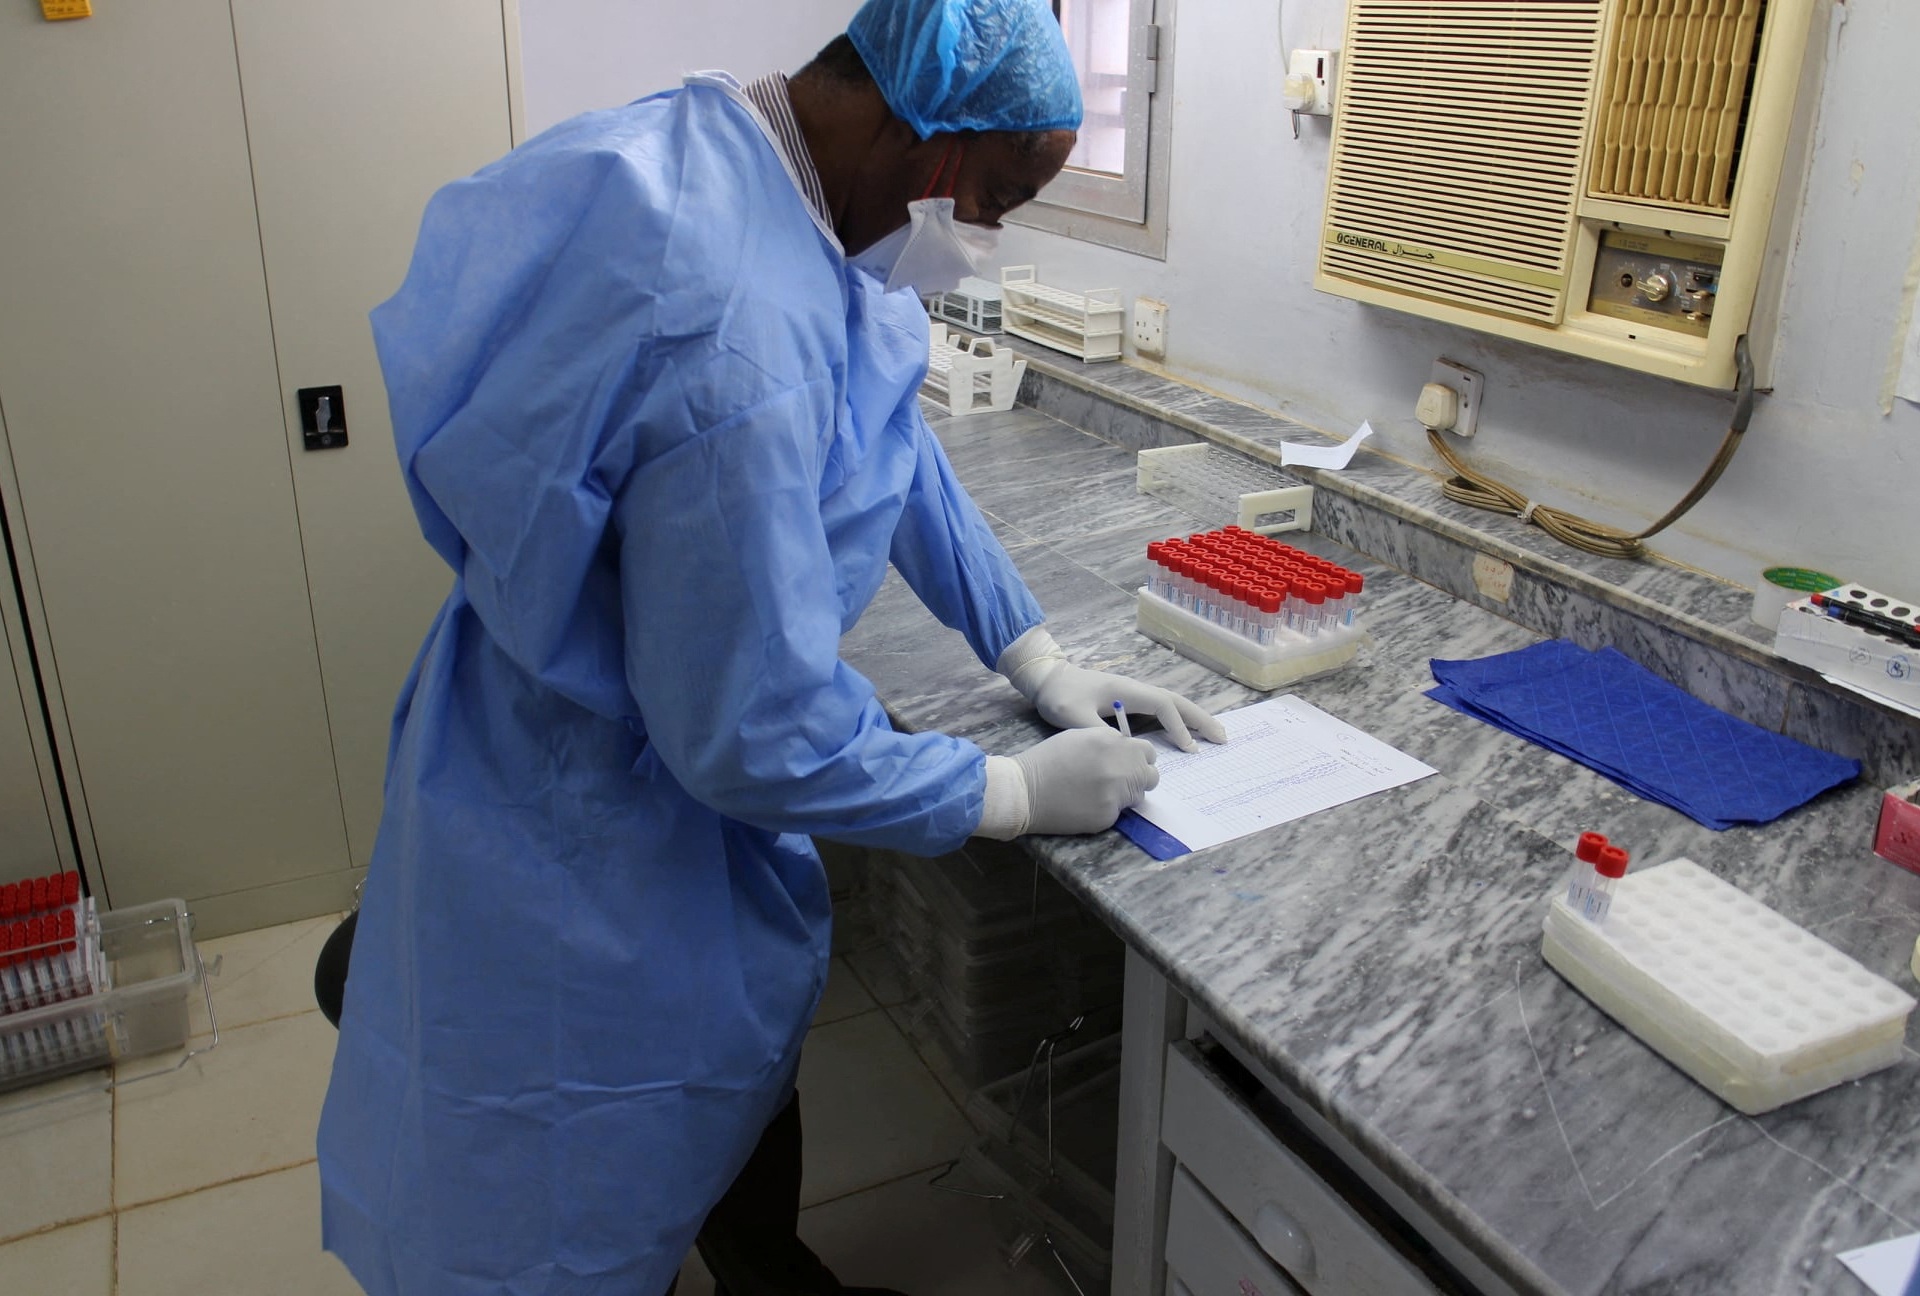 WHO Warns of 'Huge Biological Risk' After Fighters' Occupation of Health Lab in Sudan